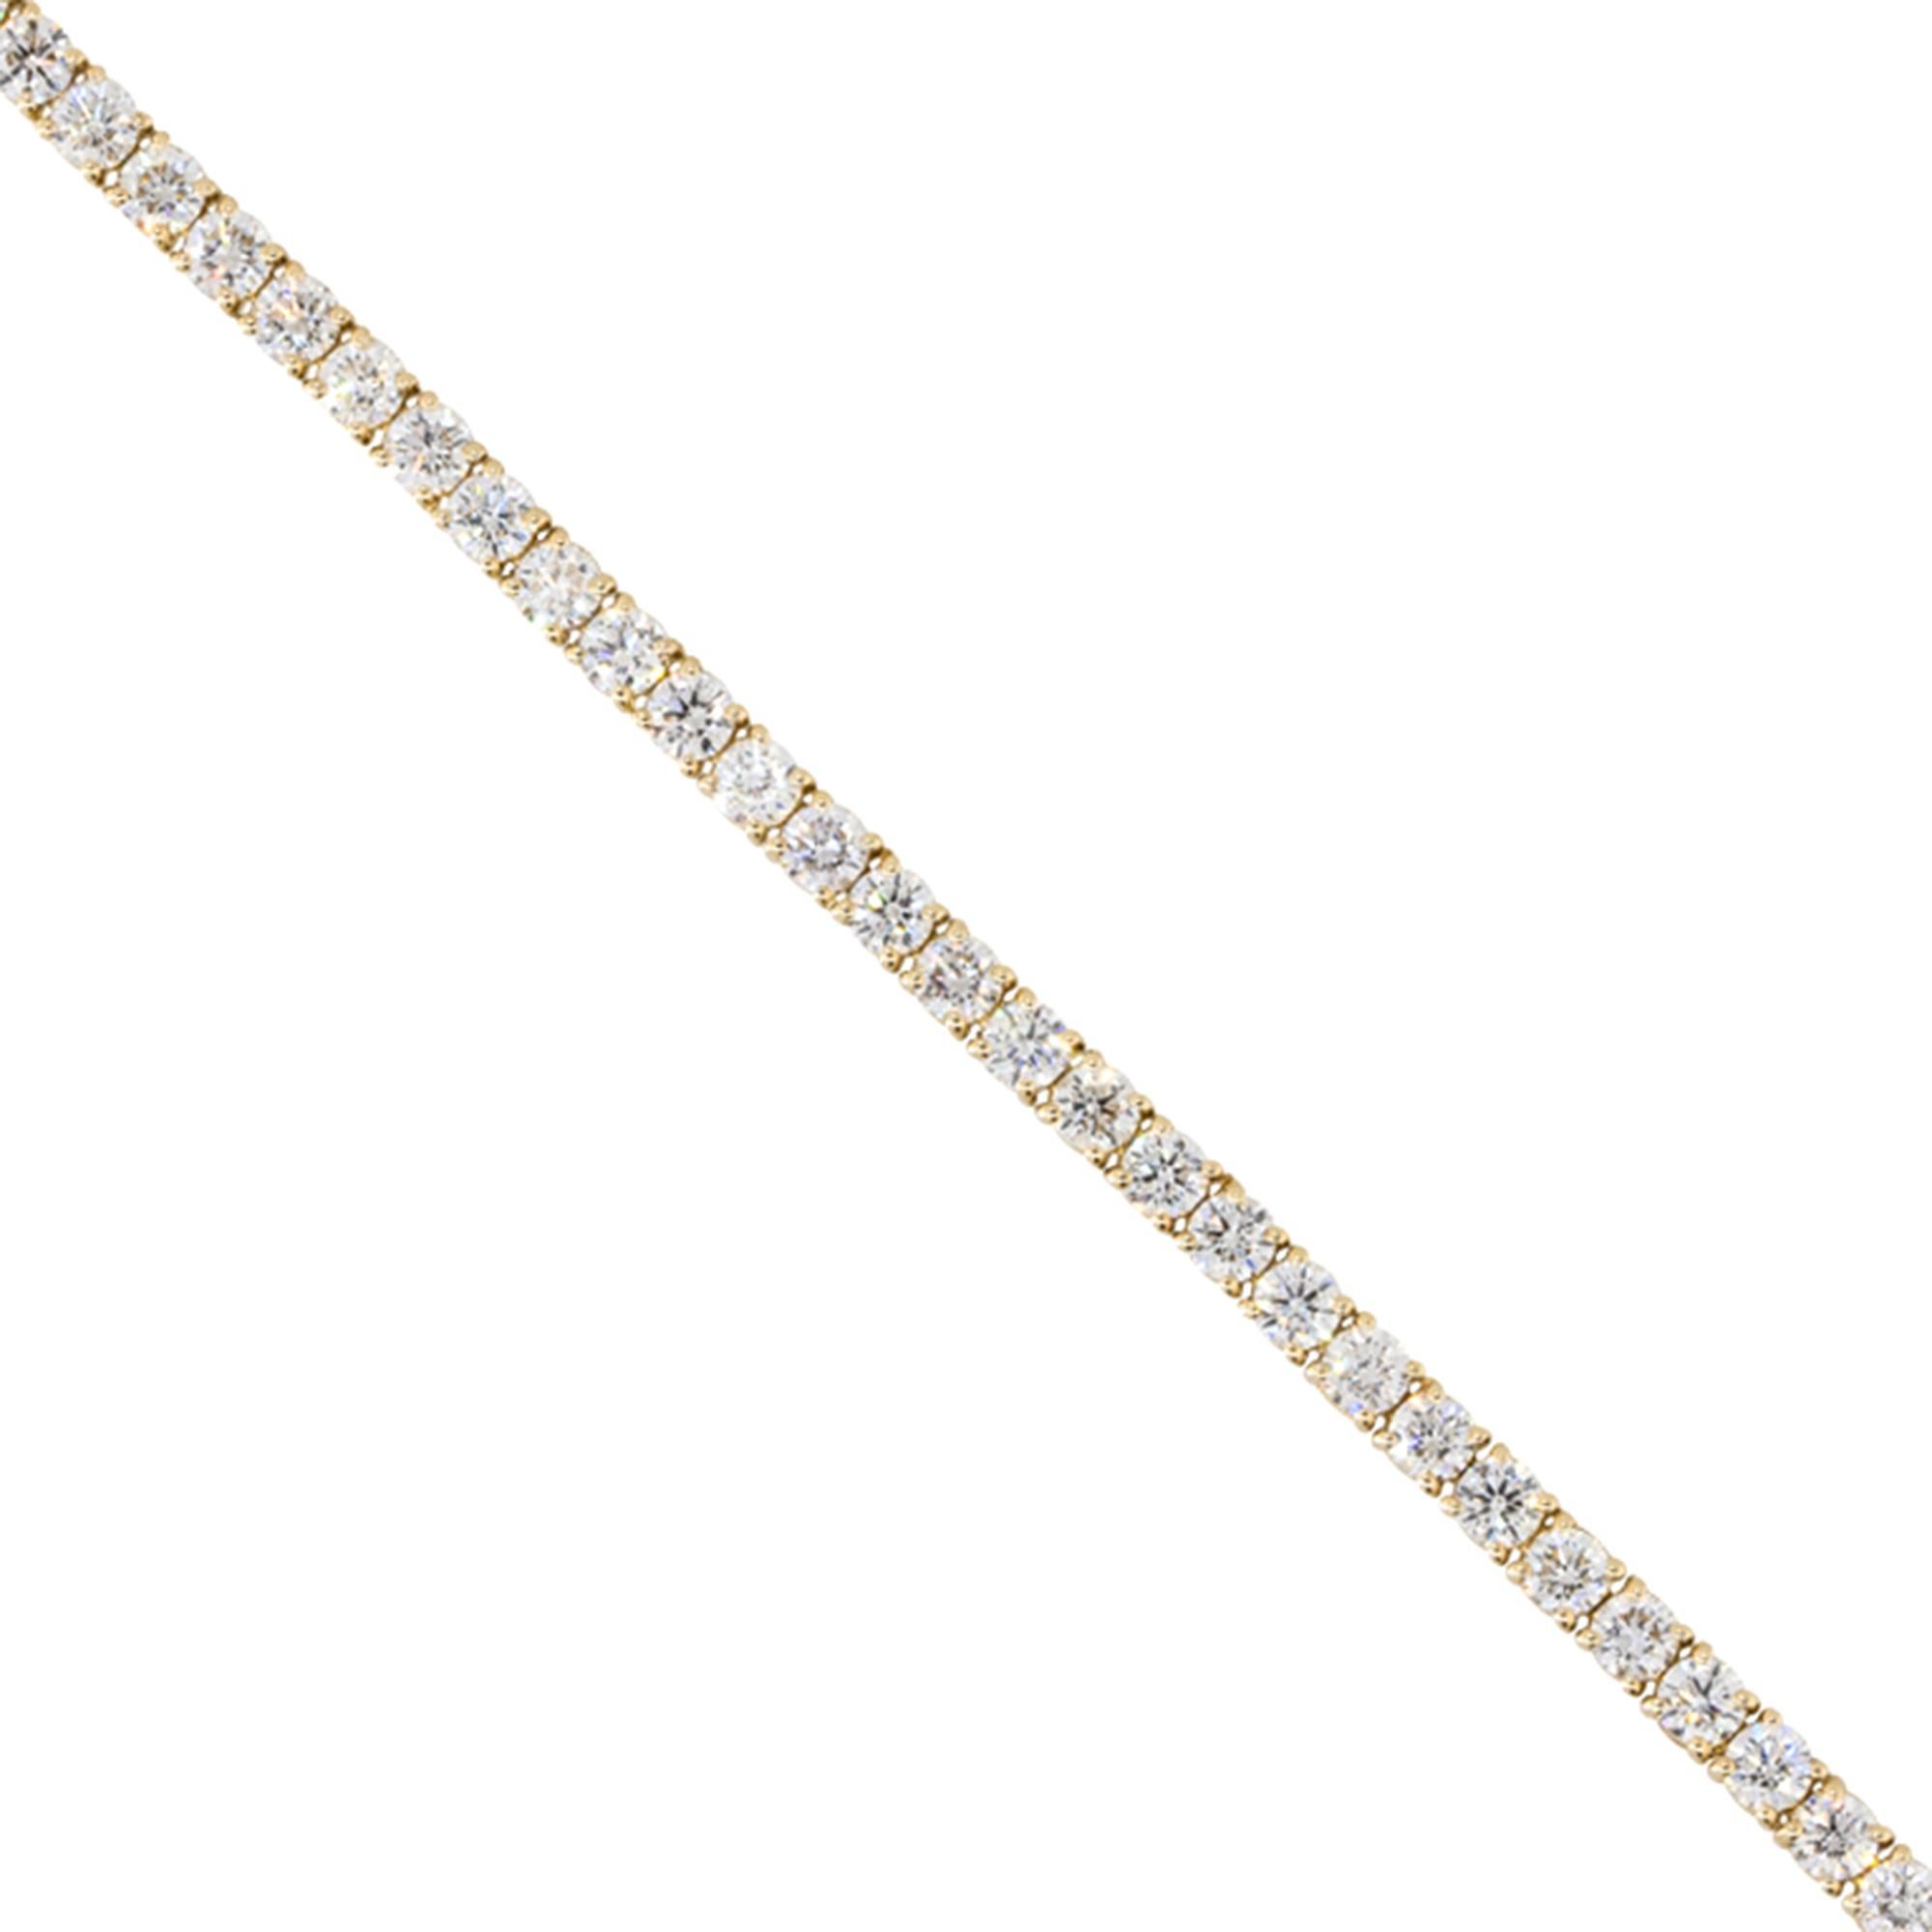 Material: 14k Yellow gold
Diamond Details: Approx. 5.0ctw of round cut Diamonds. Diamonds are G/H in color and VS in clarity.
Clasps: Tongue in box clasp
Total Weight: 8.0g (5.2dwt)
Length: 7